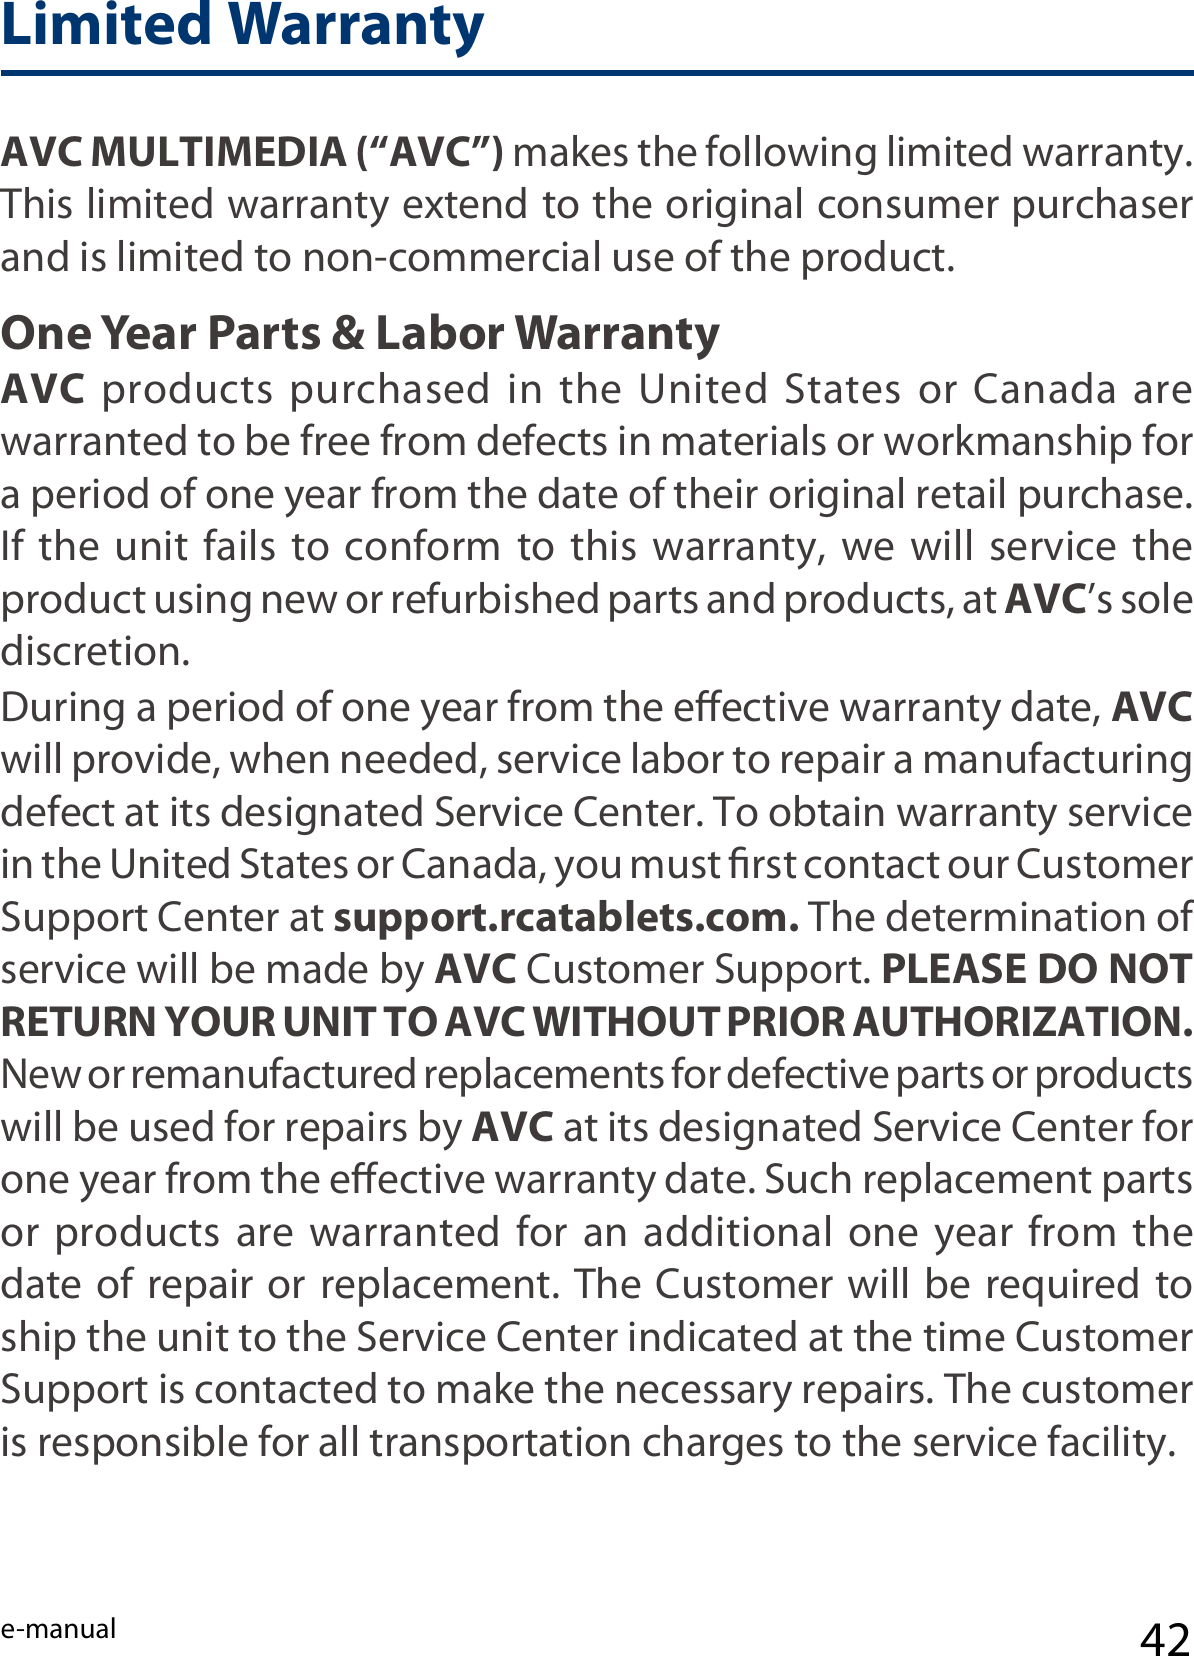 e-manual 42Limited WarrantyAVC MULTIMEDIA (“AVC”) makes the following limited warranty. This limited warranty extend to the original consumer purchaser and is limited to non-commercial use of the product.One Year Parts &amp; Labor WarrantyAVC  products  purchased  in  the  United  States  or  Canada  are warranted to be free from defects in materials or workmanship for a period of one year from the date of their original retail purchase. If the unit fails  to  conform  to  this warranty,  we  will  service  the product using new or refurbished parts and products, at AVC’s sole discretion.During a period of one year from the eective warranty date, AVC will provide, when needed, service labor to repair a manufacturing defect at its designated Service Center. To obtain warranty service in the United States or Canada, you must rst contact our Customer Support Center at support.rcatablets.com. The determination of service will be made by AVC Customer Support. PLEASE DO NOT RETURN YOUR UNIT TO AVC WITHOUT PRIOR AUTHORIZATION. New or remanufactured replacements for defective parts or products will be used for repairs by AVC at its designated Service Center for one year from the eective warranty date. Such replacement parts or products are warranted for an additional one year from the date of repair or replacement. The Customer will be required to ship the unit to the Service Center indicated at the time Customer Support is contacted to make the necessary repairs. The customer is responsible for all transportation charges to the service facility.